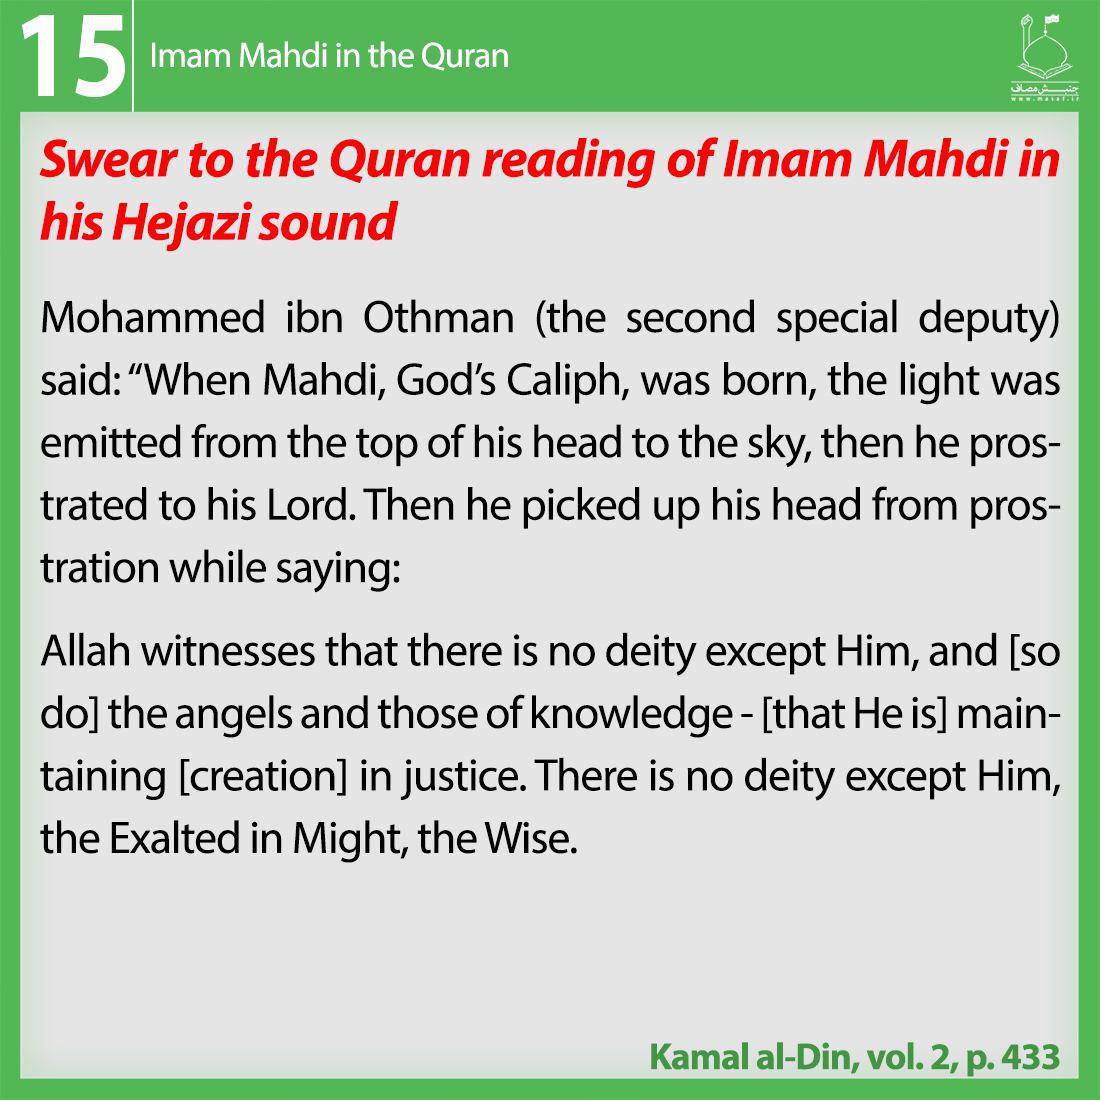 12th imam in the quran , 12th caliphs